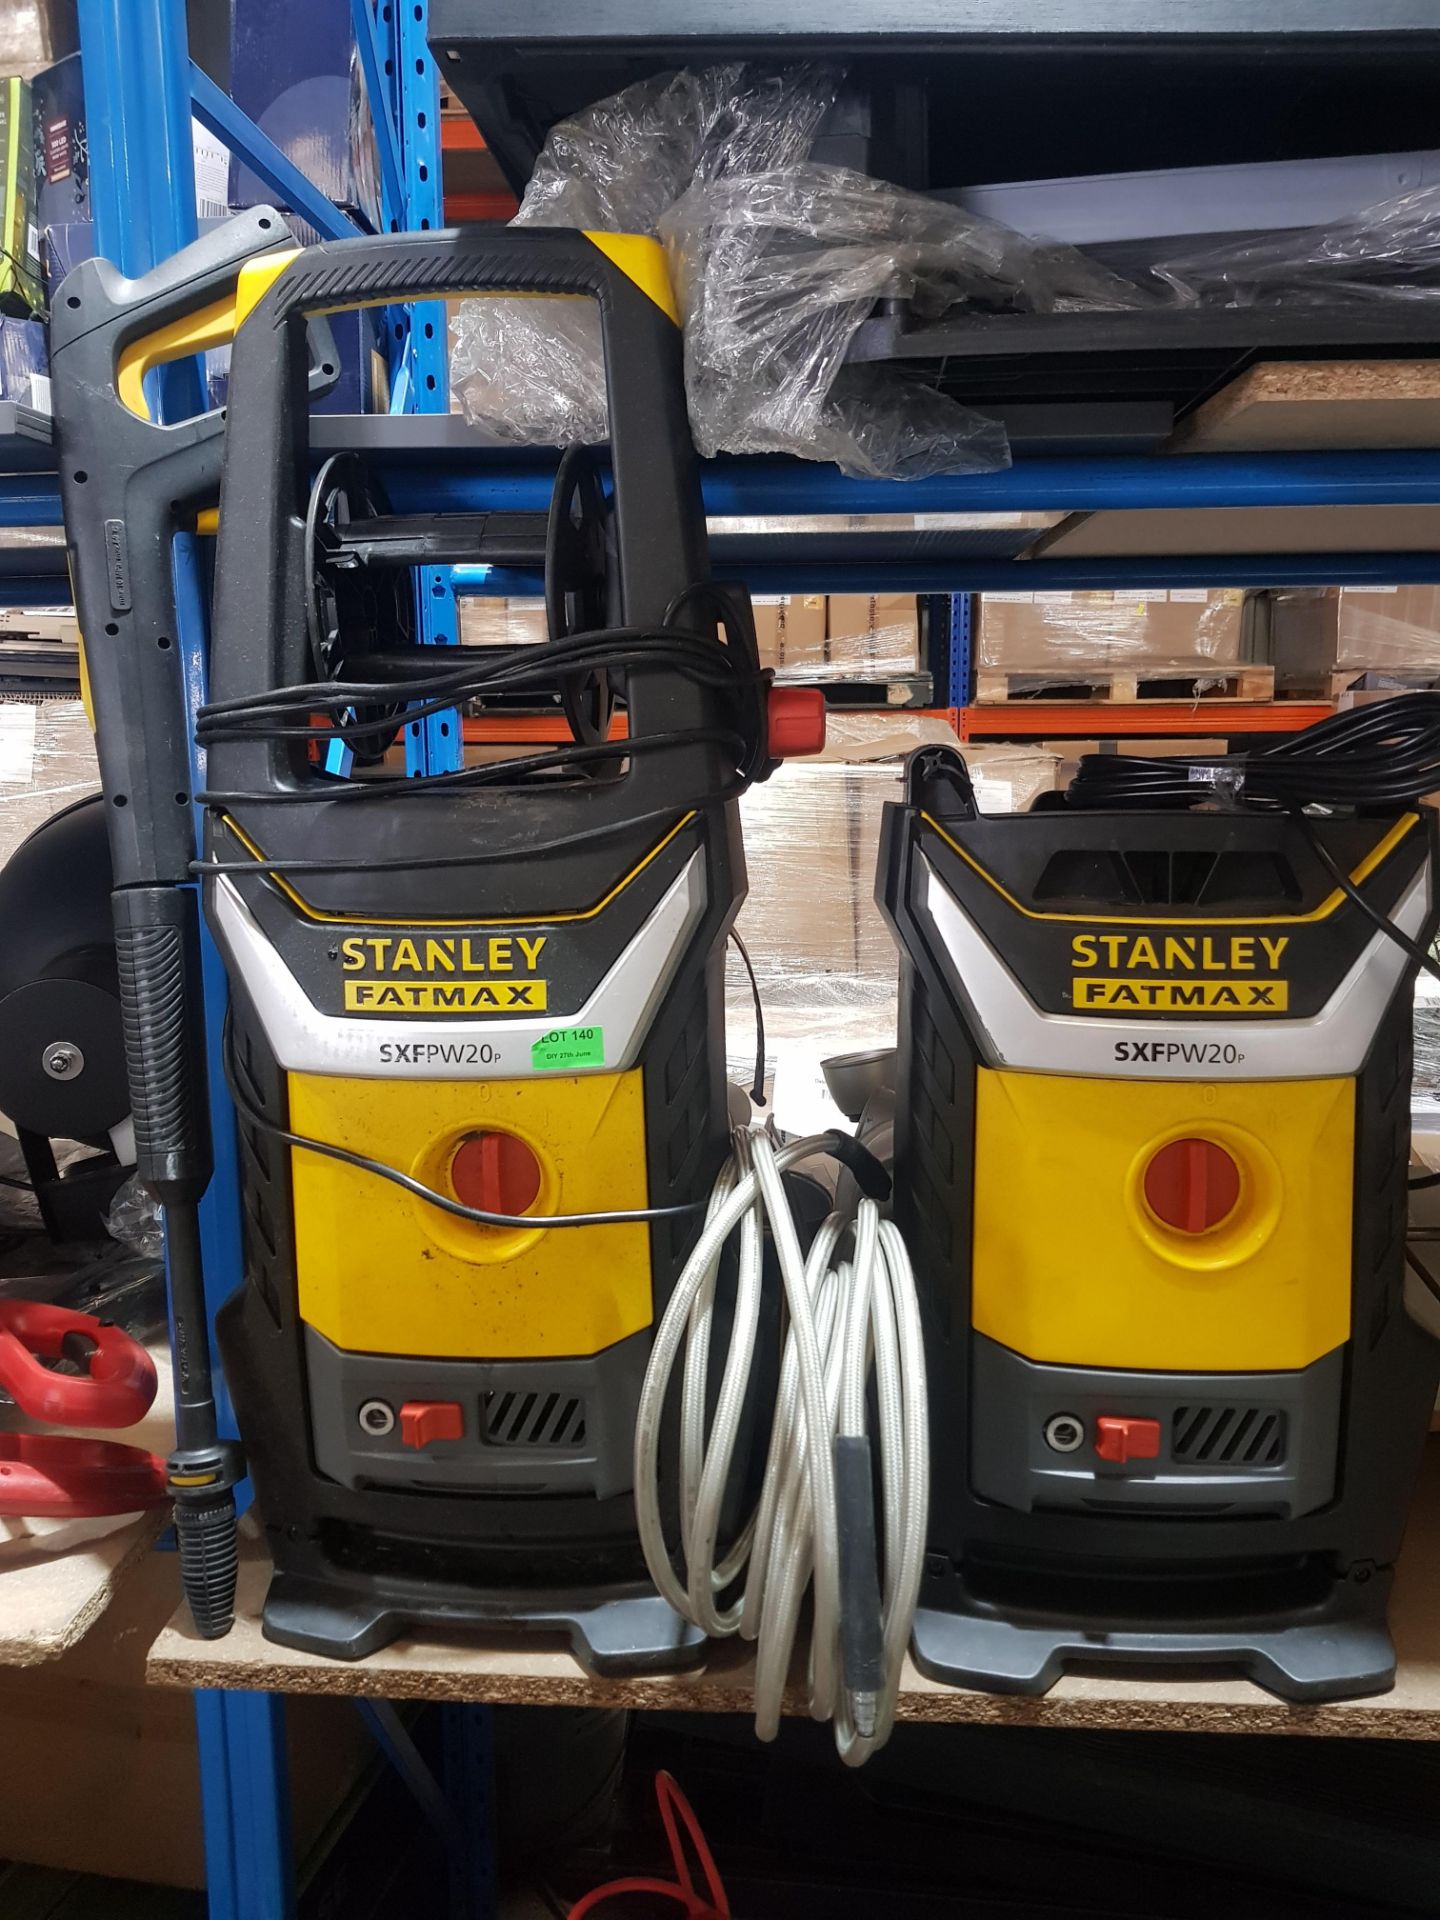 (R9D) 2x Stanley Fatmax SXFPW20p High Pressure Washer. - Image 2 of 2